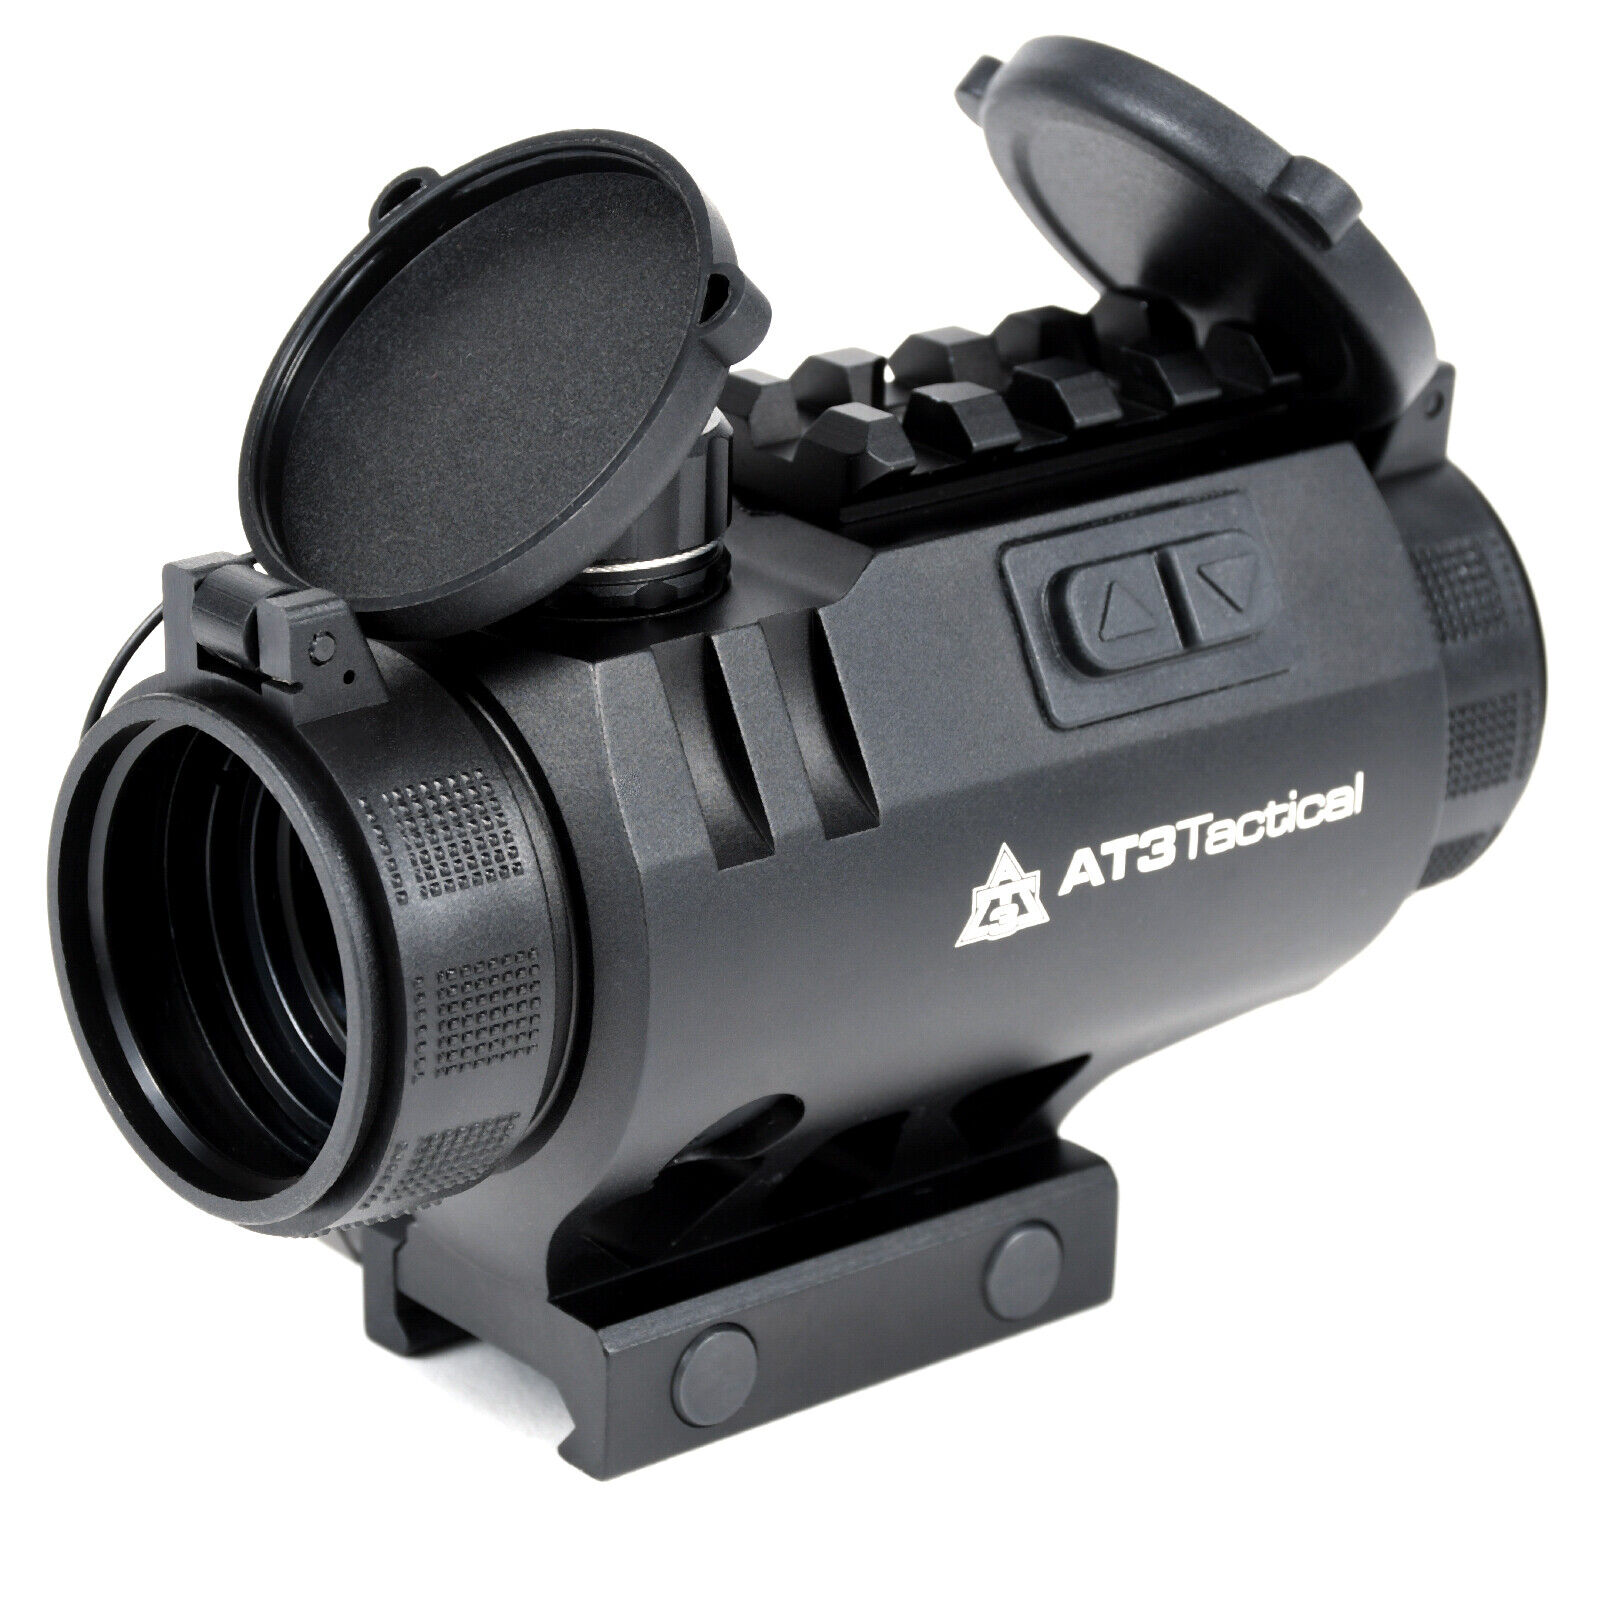 AT3 Tactical 3xP Prism Scope - 3x Magnification with BDC Reticle